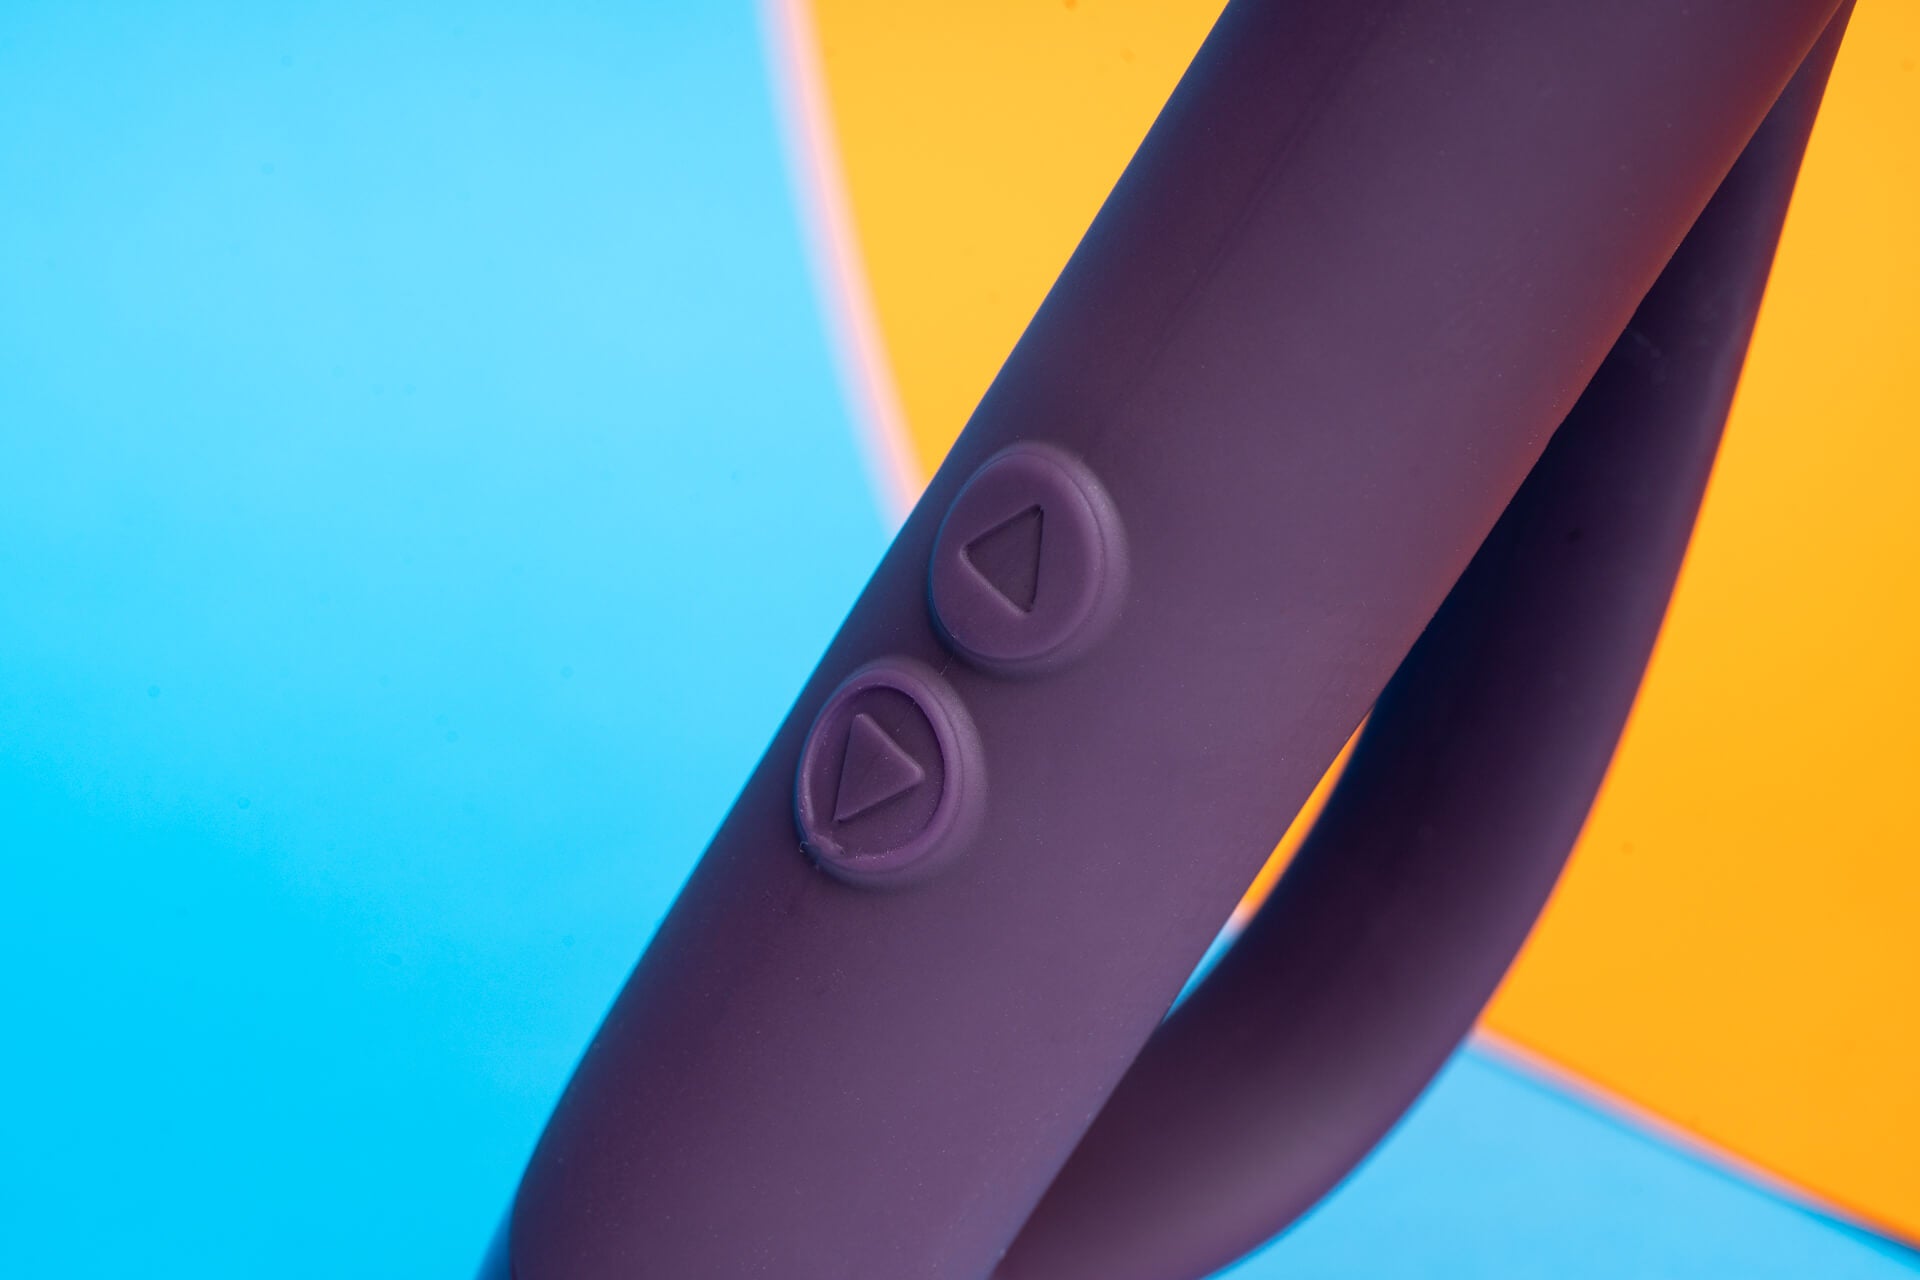 Two big buttons on the handle of the accessible wand vibrator.